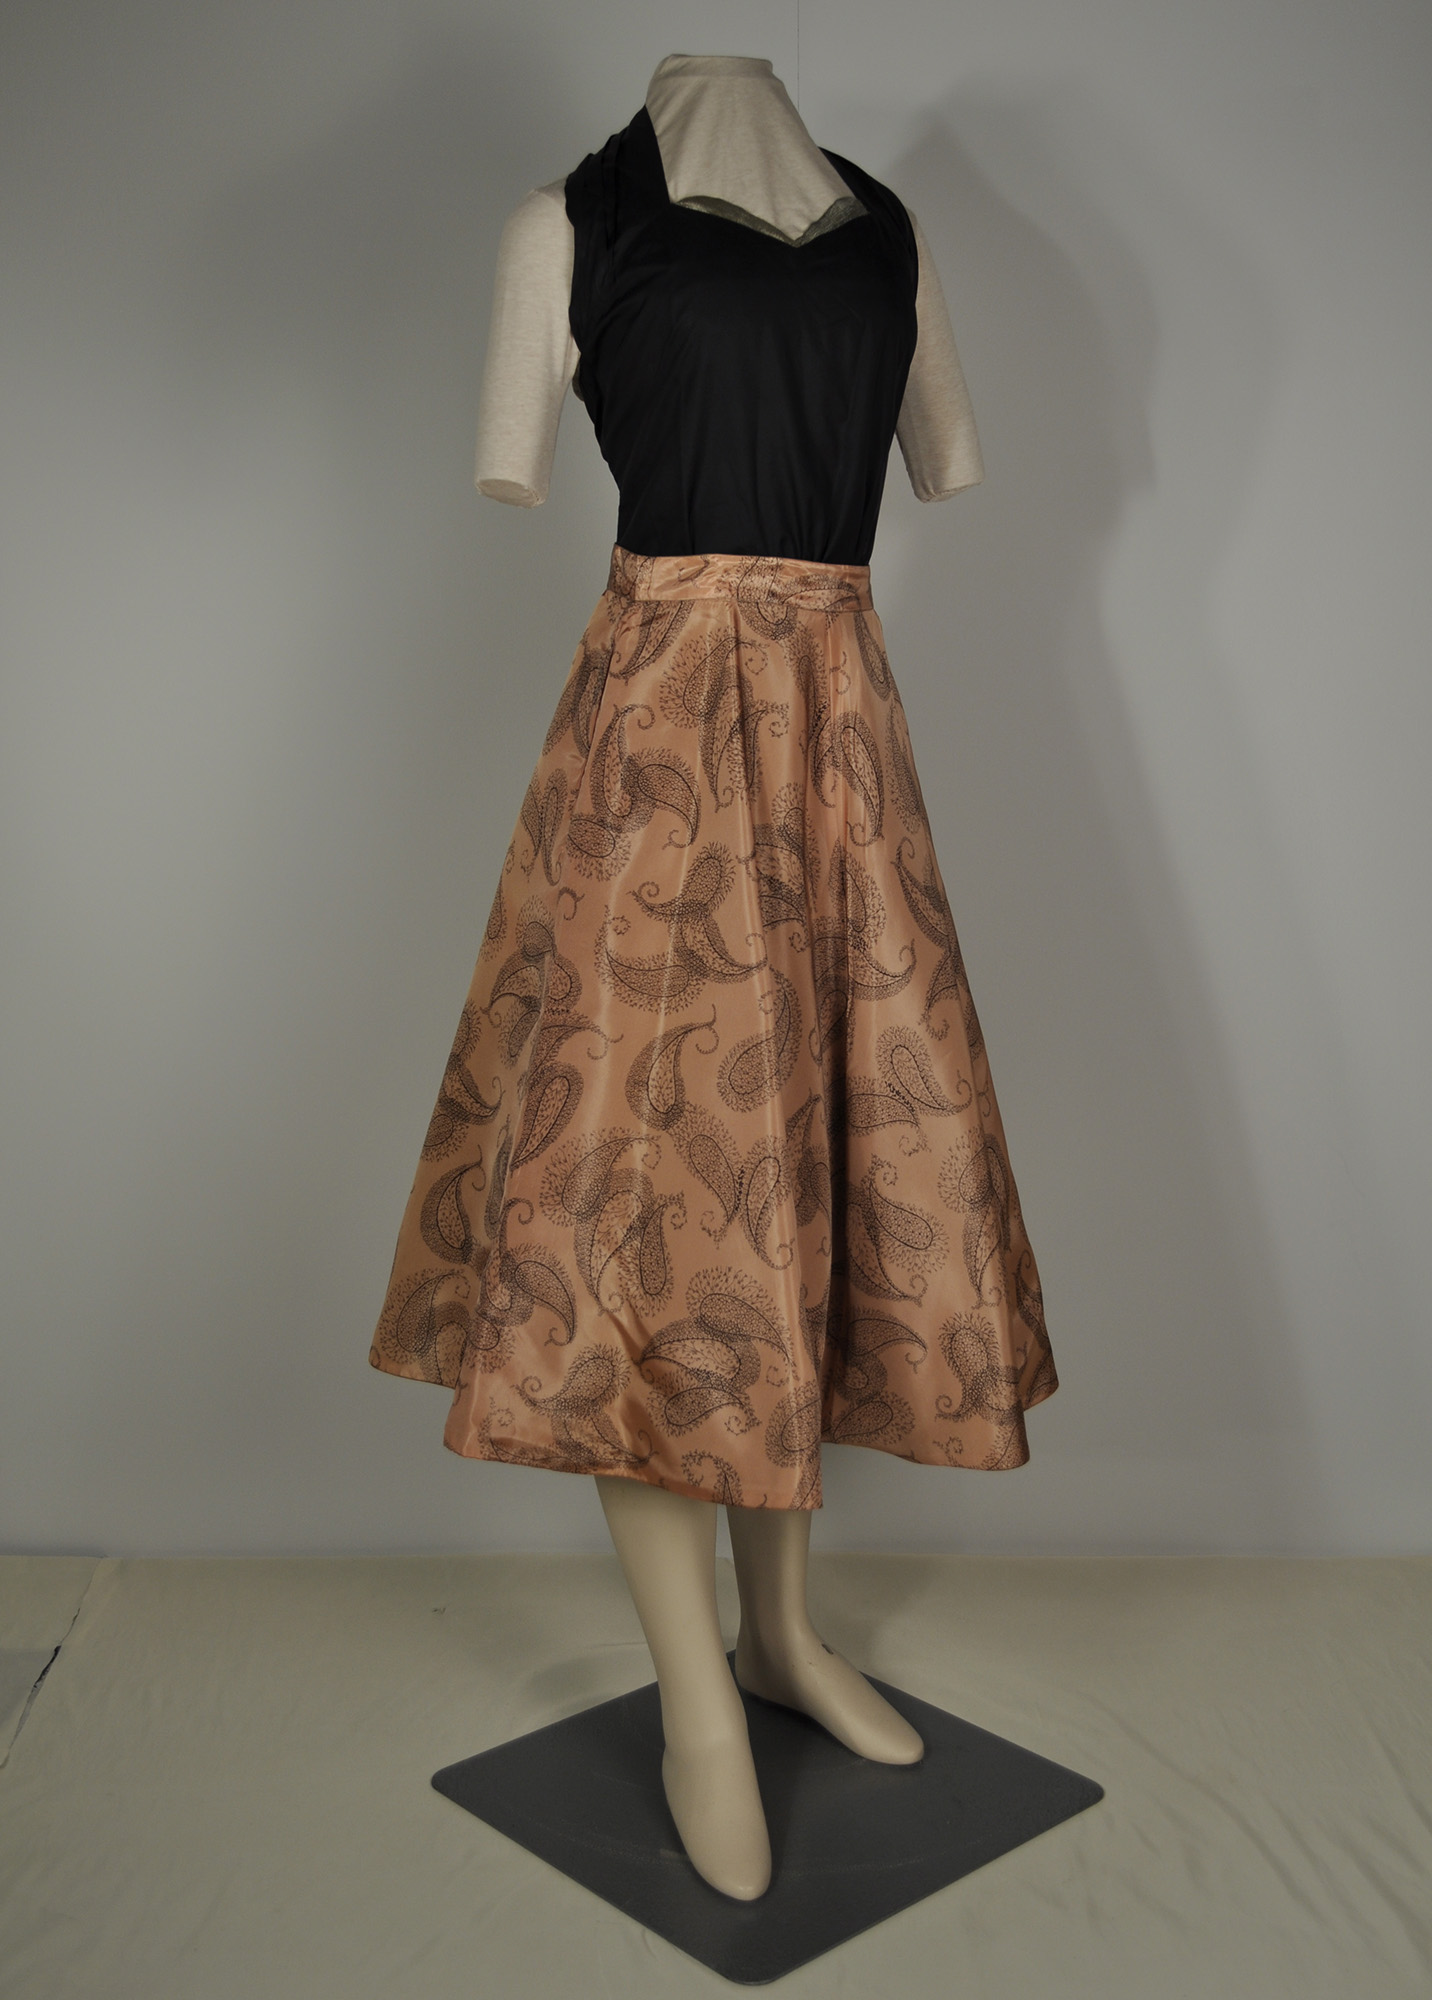 A 1950s woman's outfit consisting of a sleeveless, fitted black top with a sweetheart neckline and a peach coloured circle skirt with a paisley print